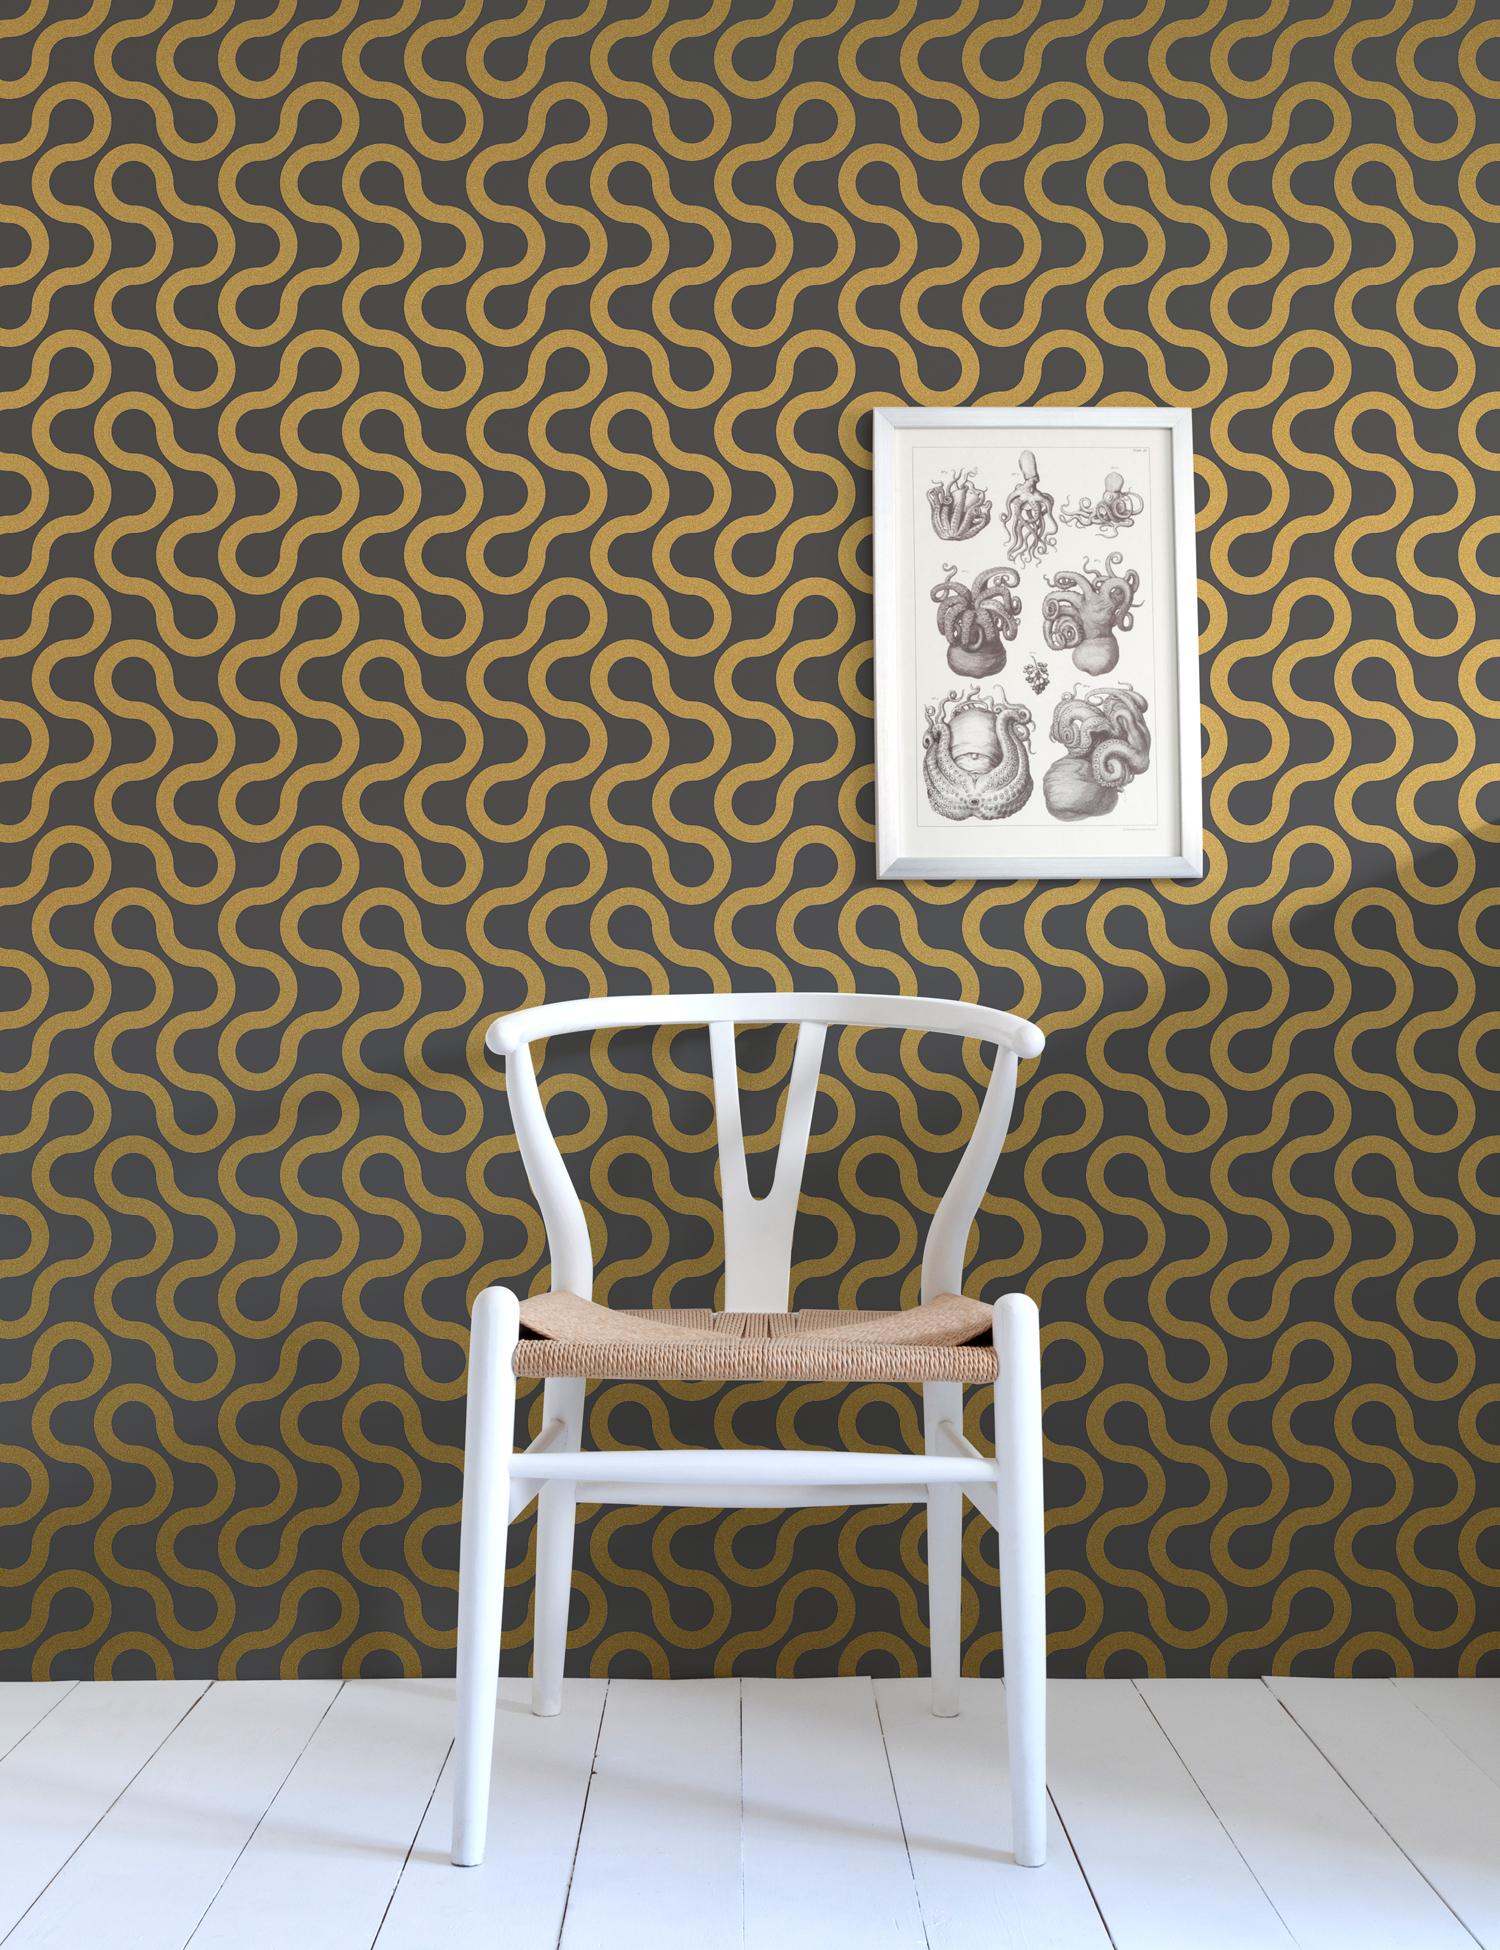 Contemporary Baby Designer Wallpaper in Eclipse 'Metallic Gold on Charcoal' For Sale